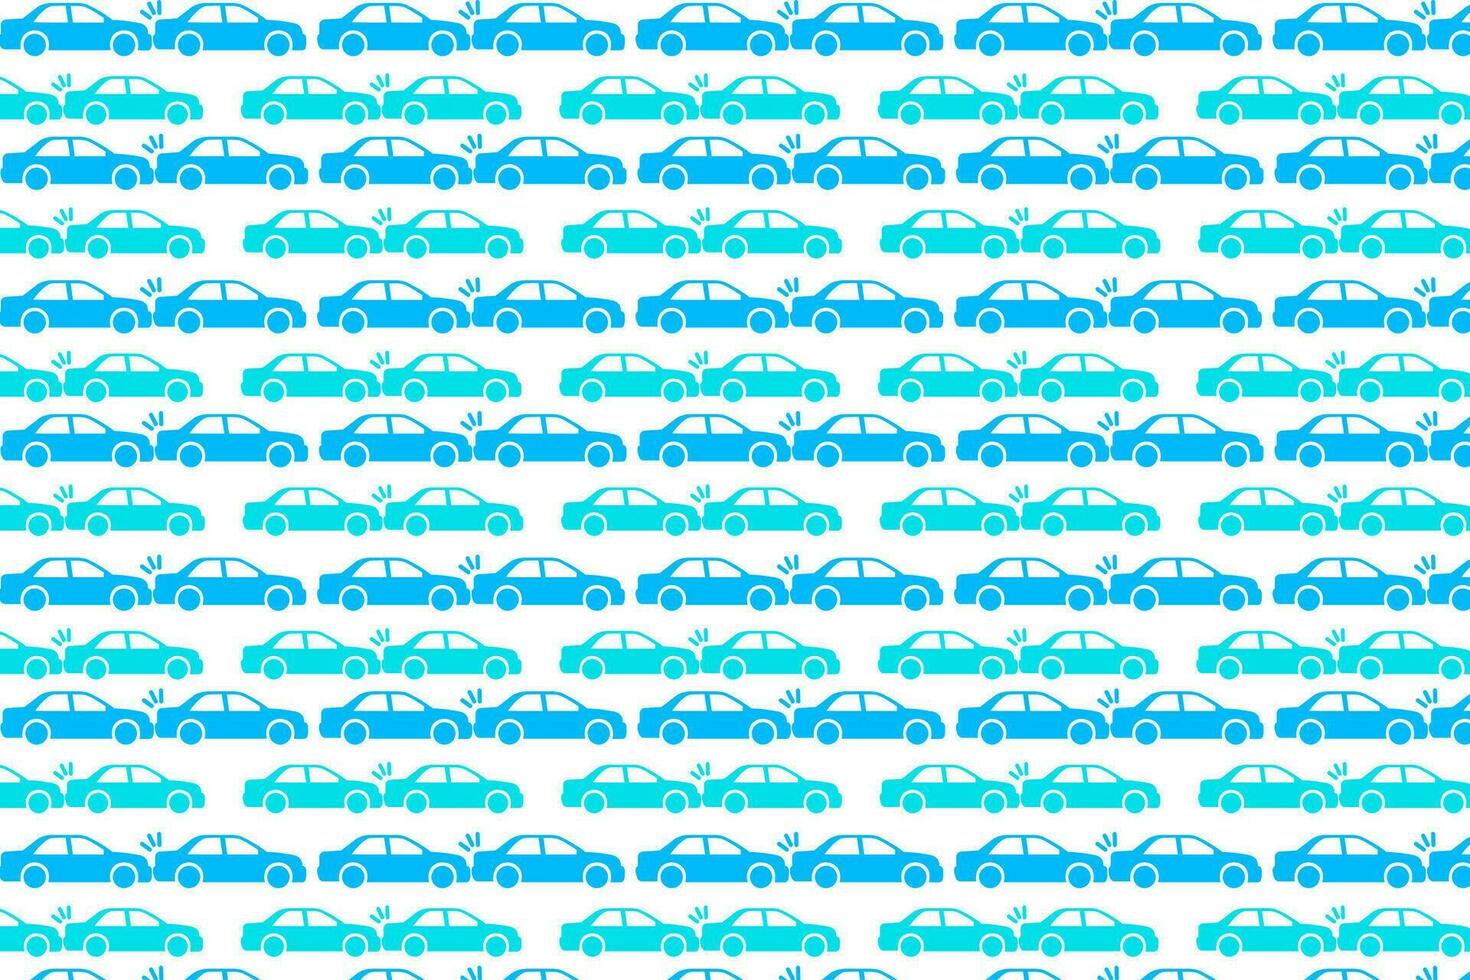 Abstract Car Accident Pattern Background vector